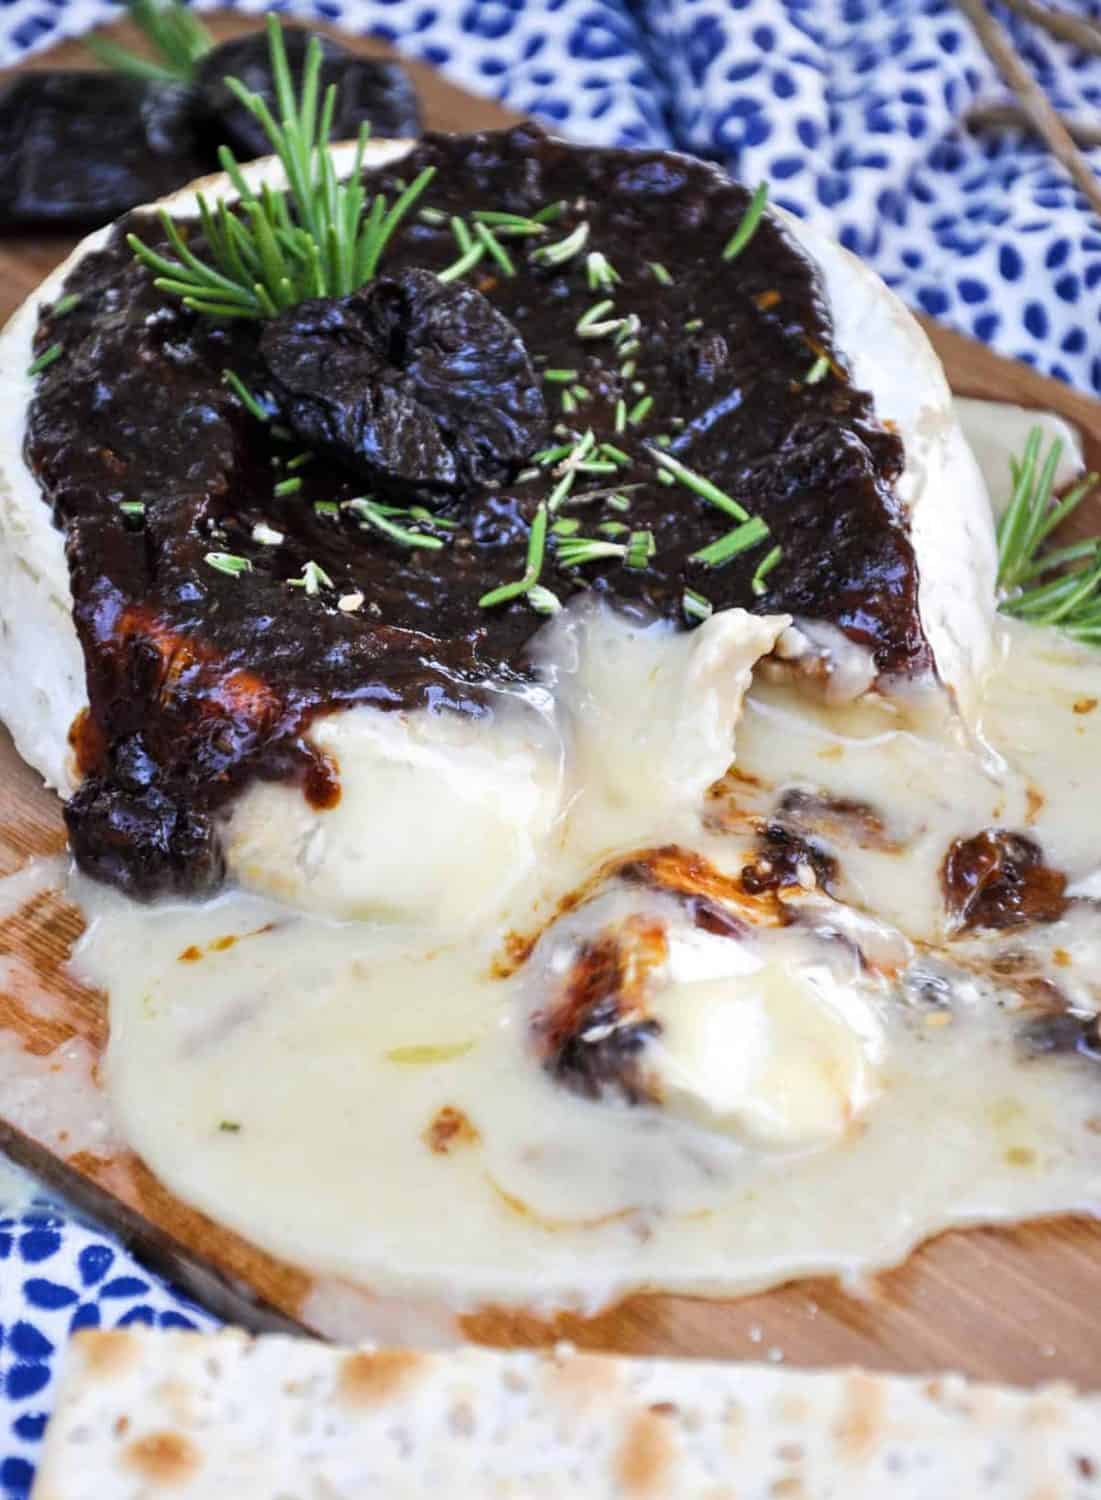 Cedar Planked Brie with Prune Rosemary Sauce